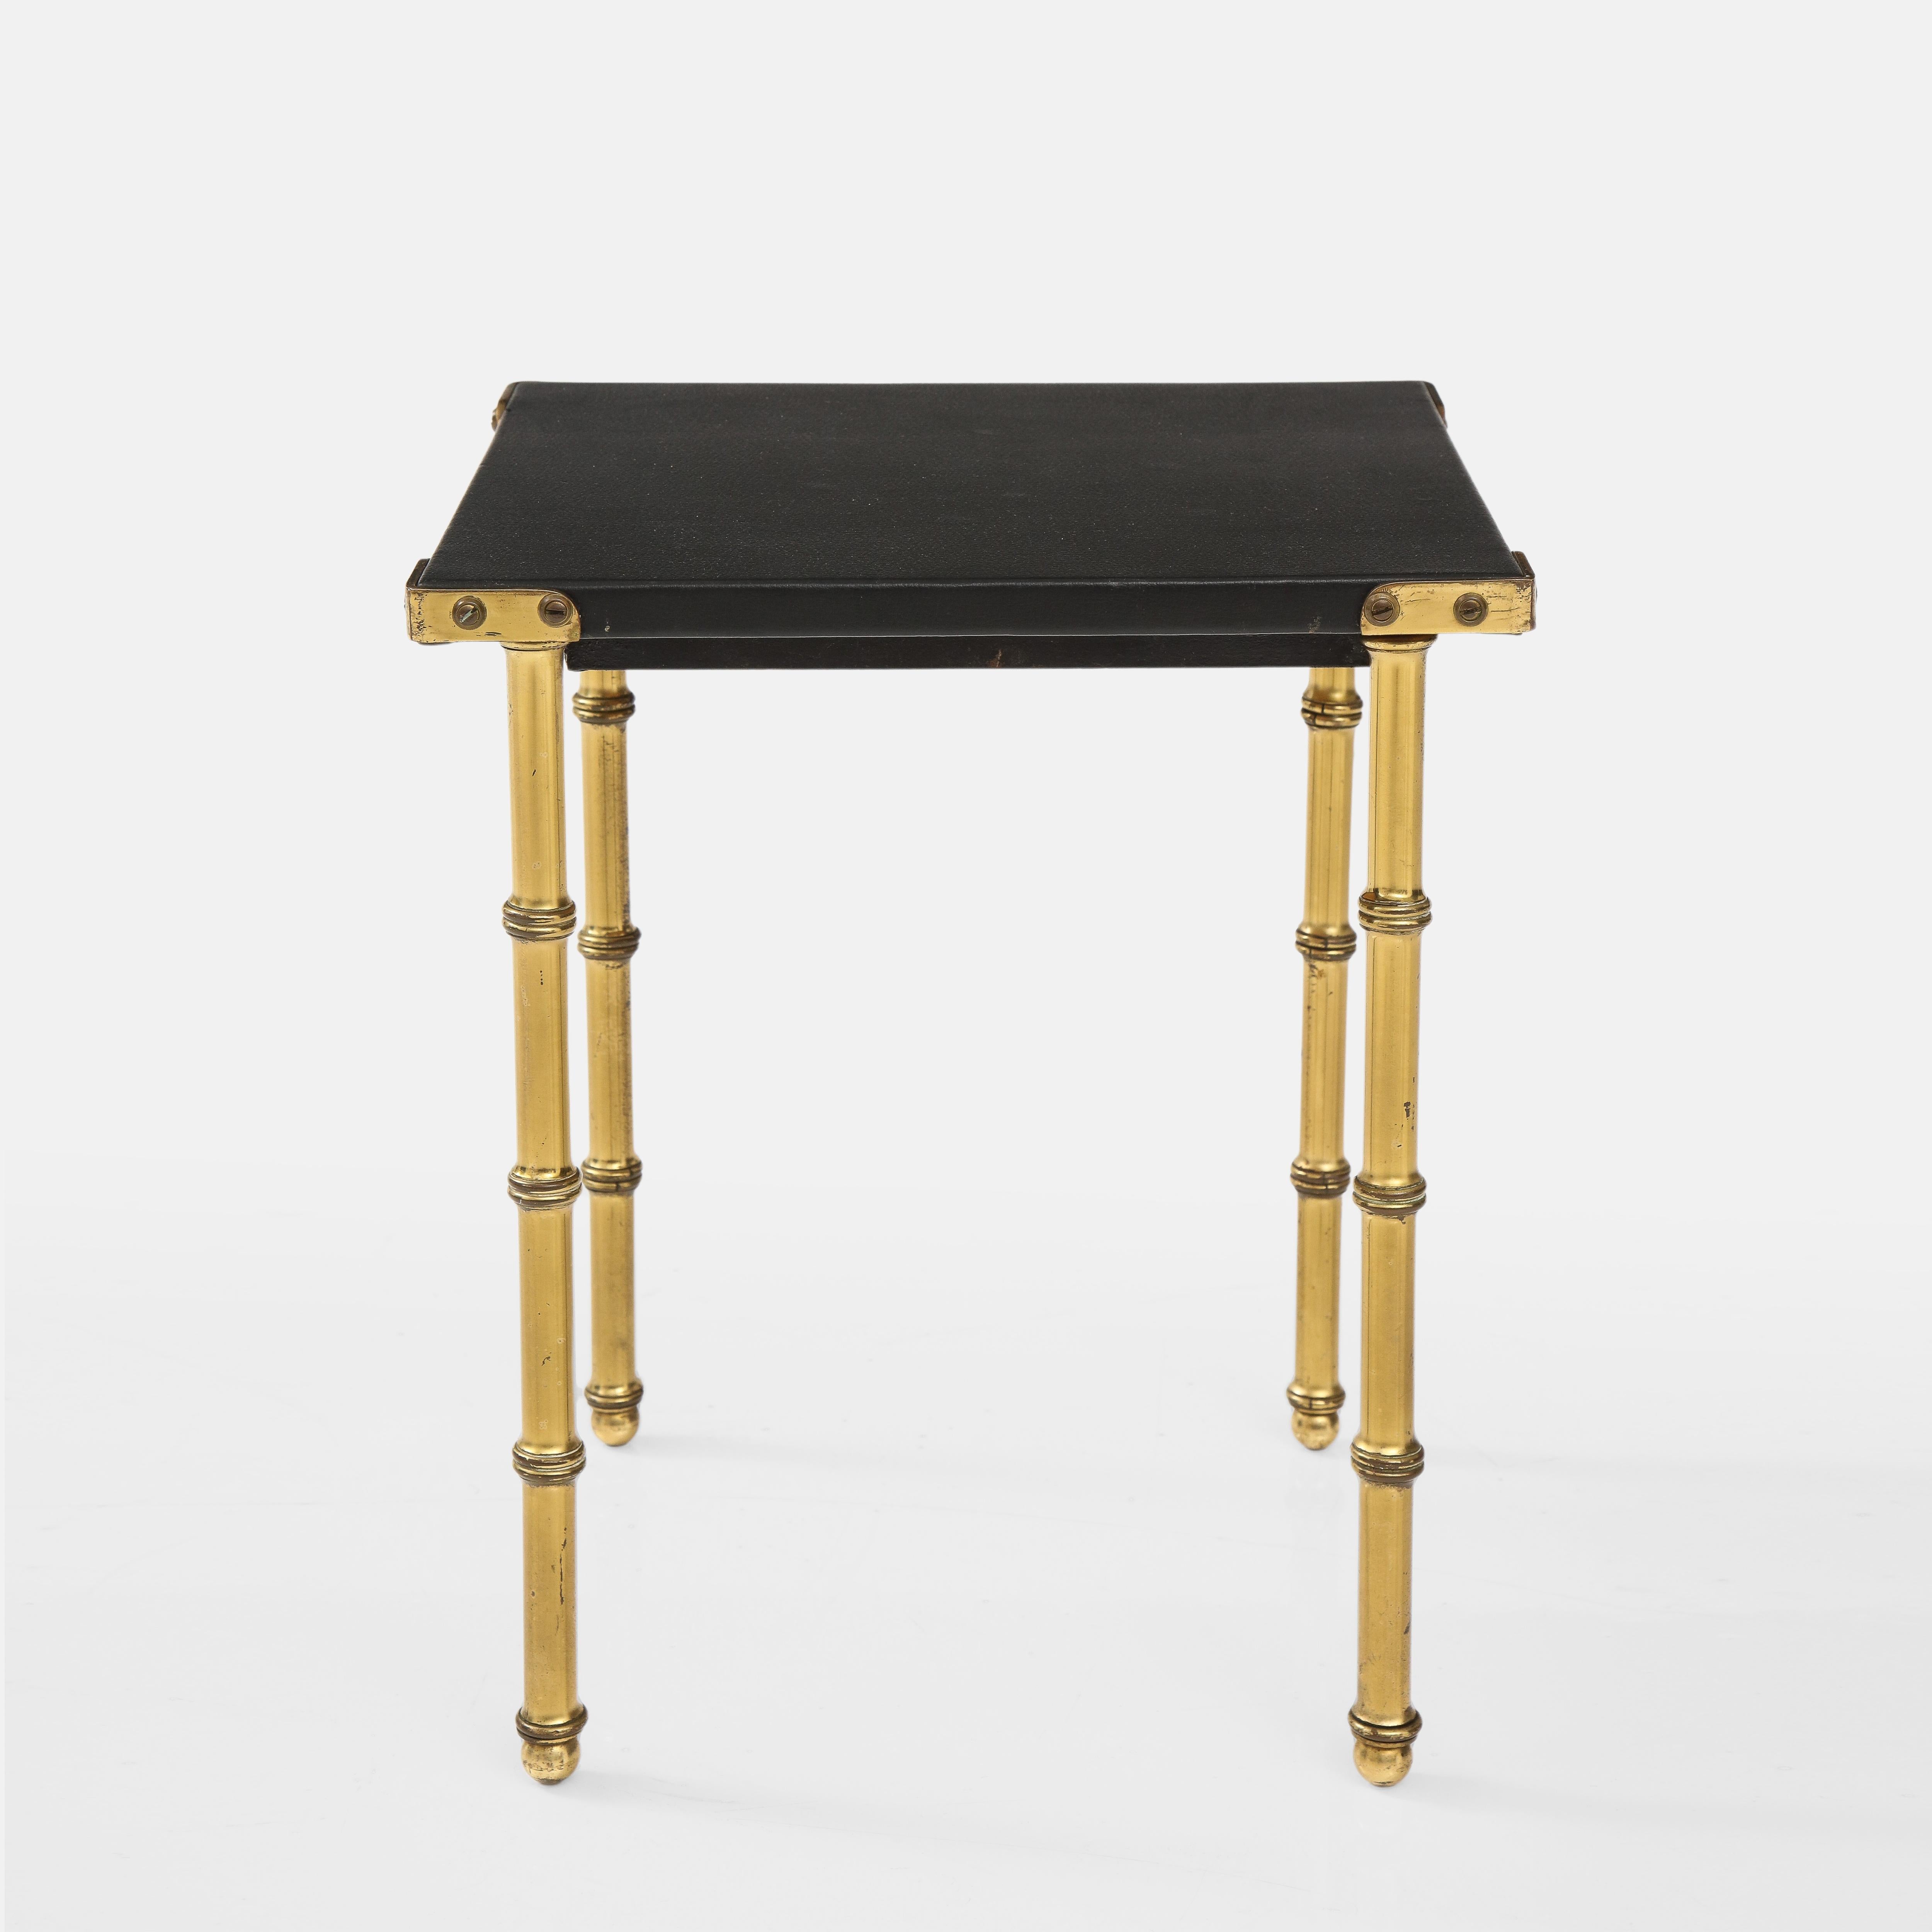 Jaques Adnet small side table with top wrapped in original black skaï and faux bamboo brass legs. It's a fine example of iconic French post-war Adnet design in which pieces of furniture, lighting and accessories were meticulously clad in